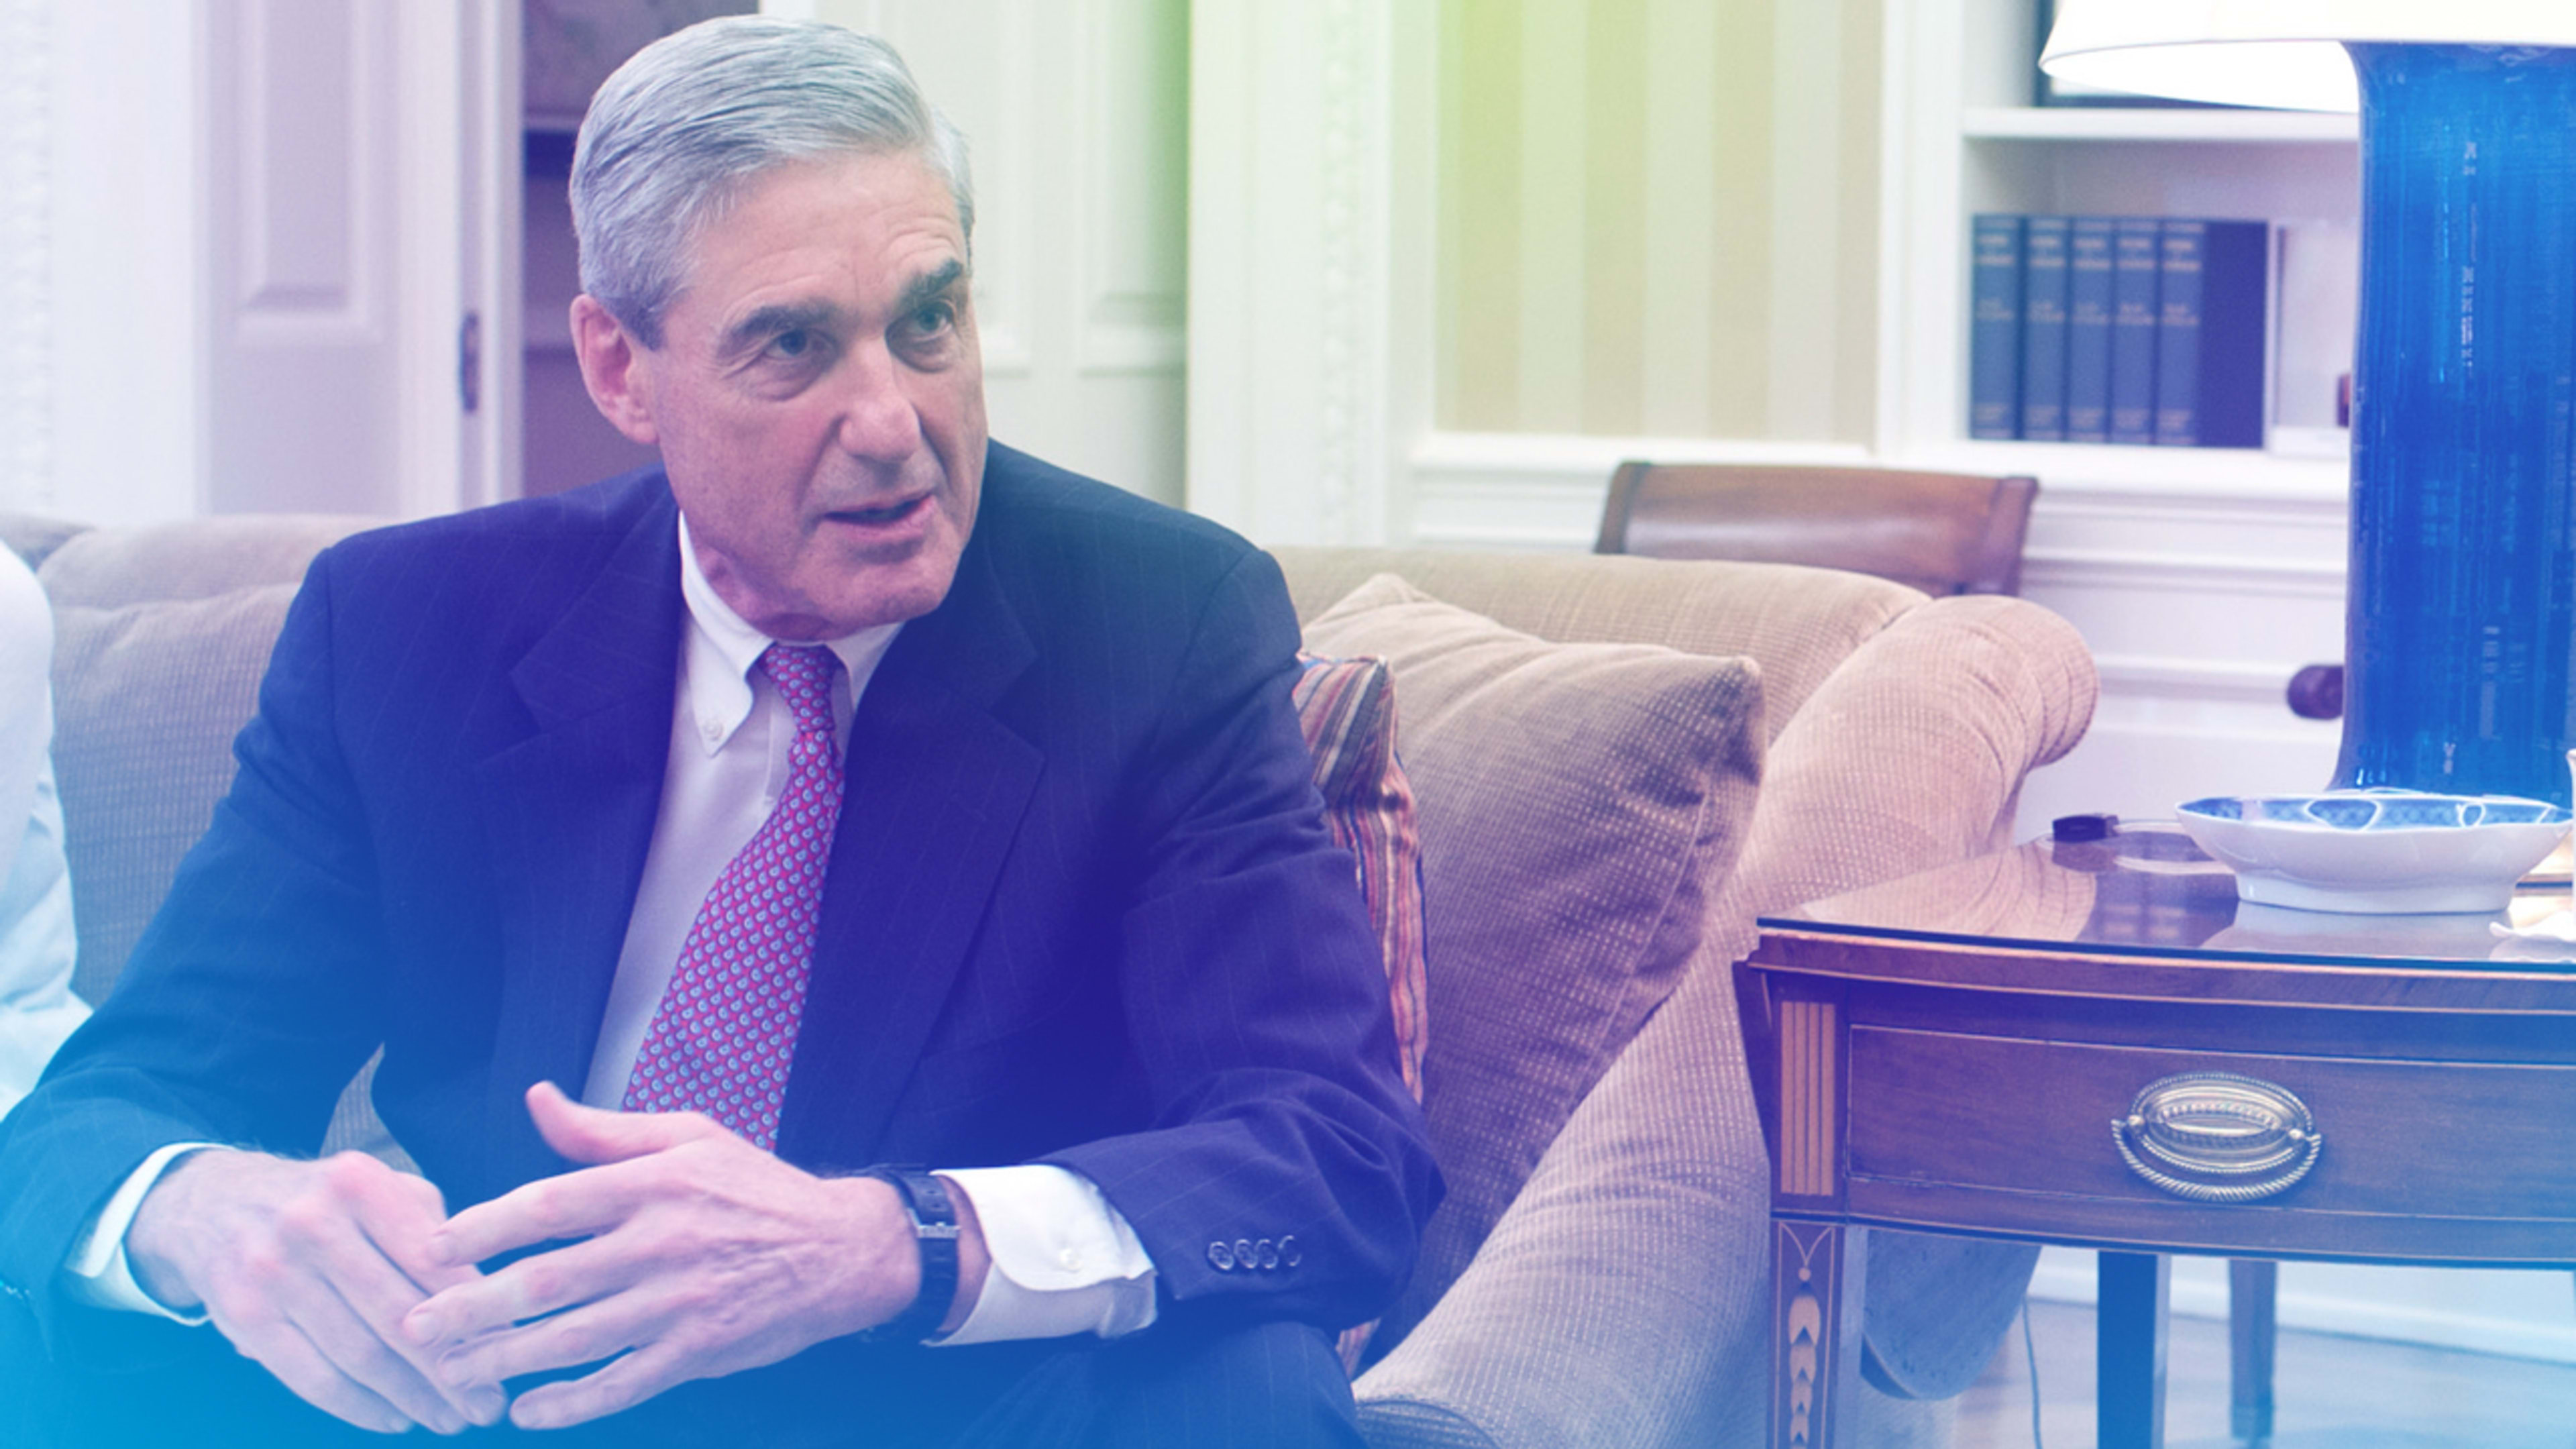 Robert Mueller is zeroing in on someone with ties to Cambridge Analytica